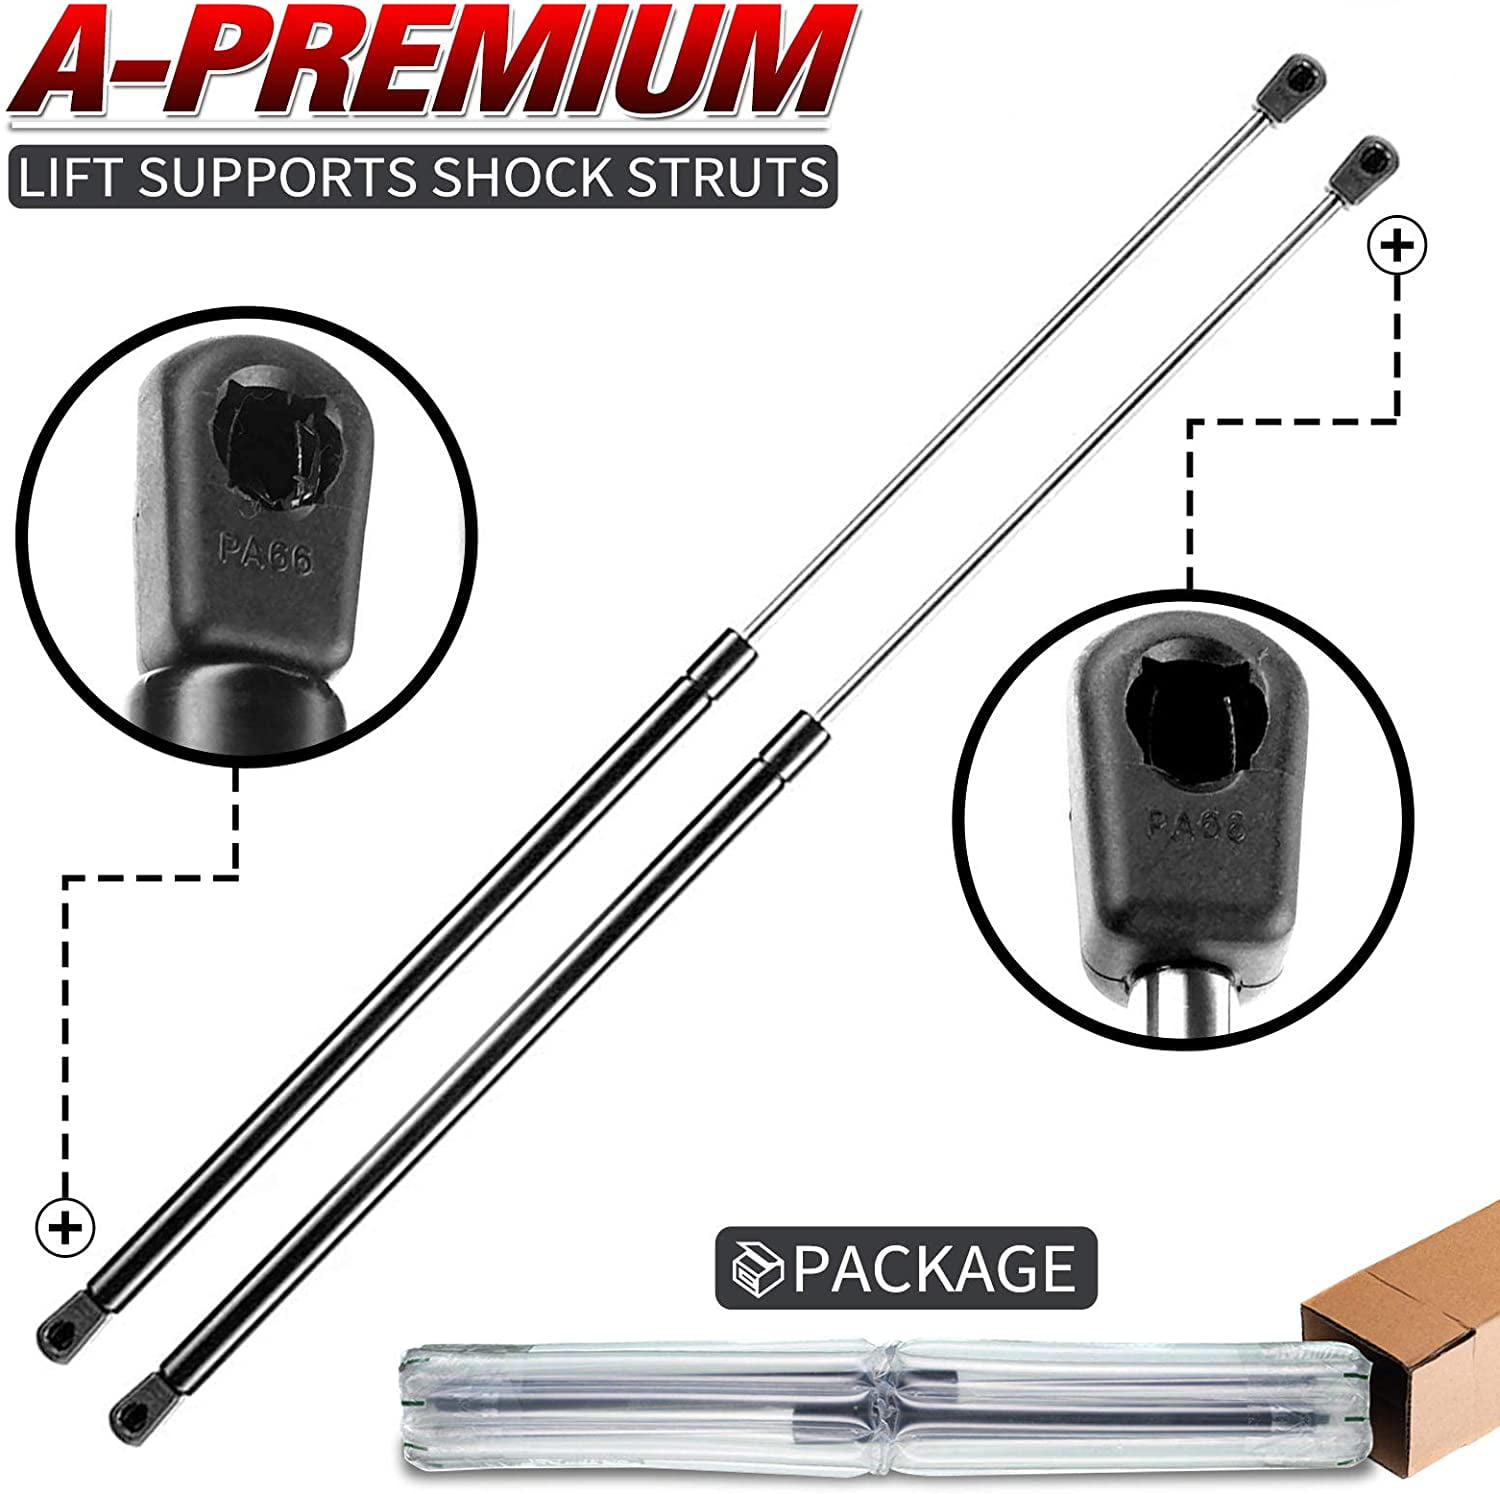 A-Preimum Rear Window Glass Lift Supports Shock Struts Replacement for Jeep  Wrangler TJ 1997-2006 with Hardtop 2-PC Set 